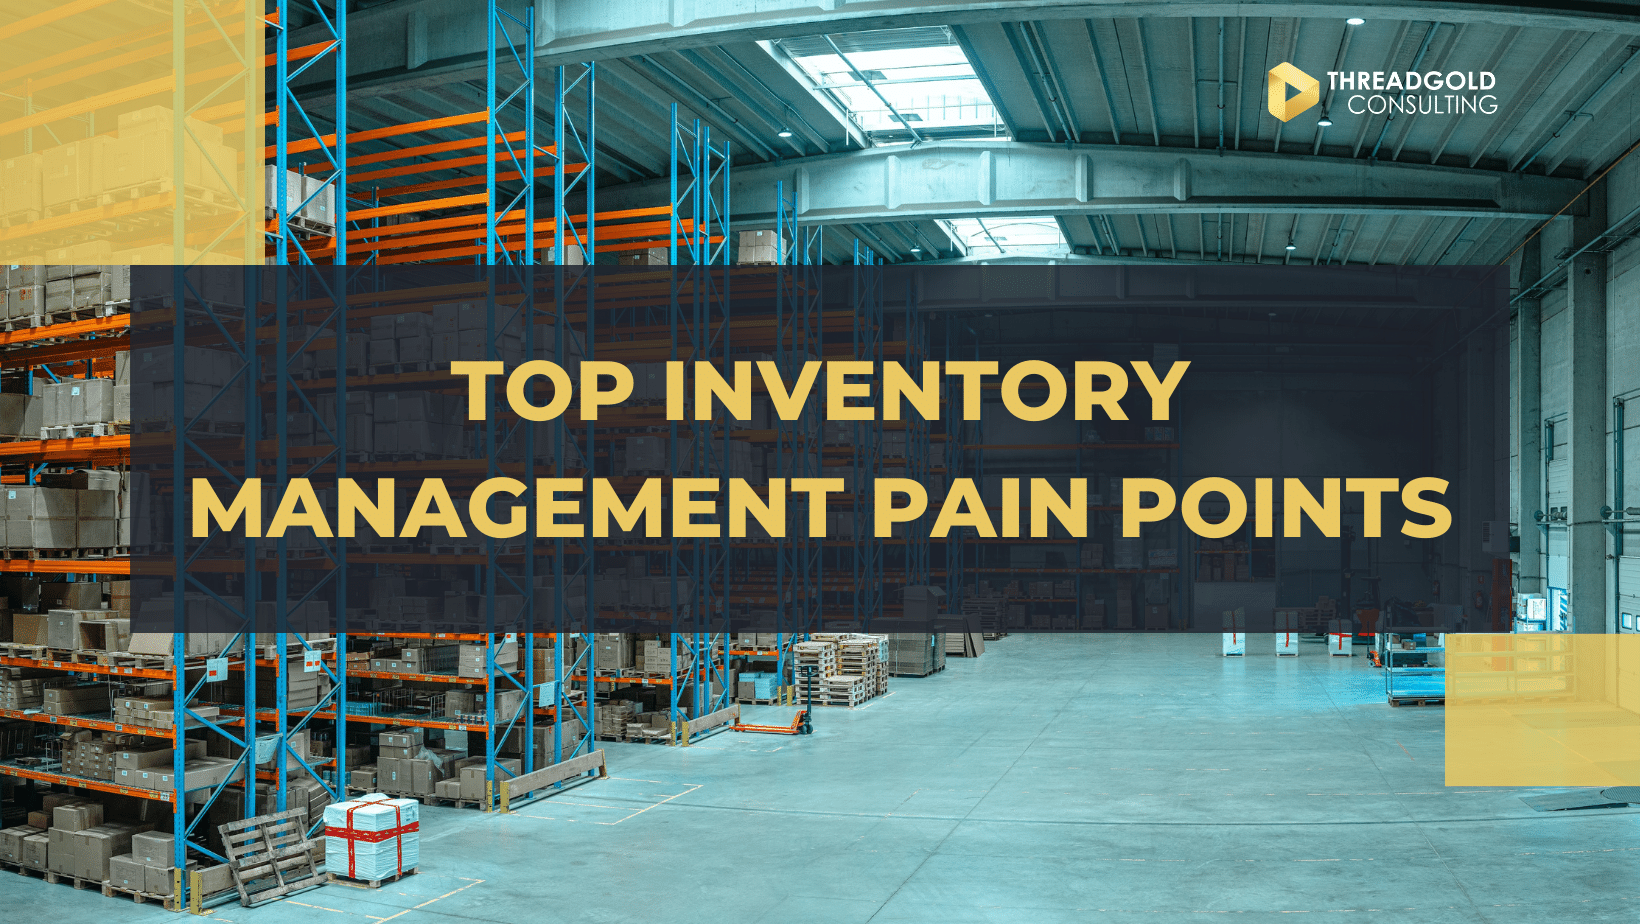 5 Most Common Inventory Management Problems and How to Solve Them